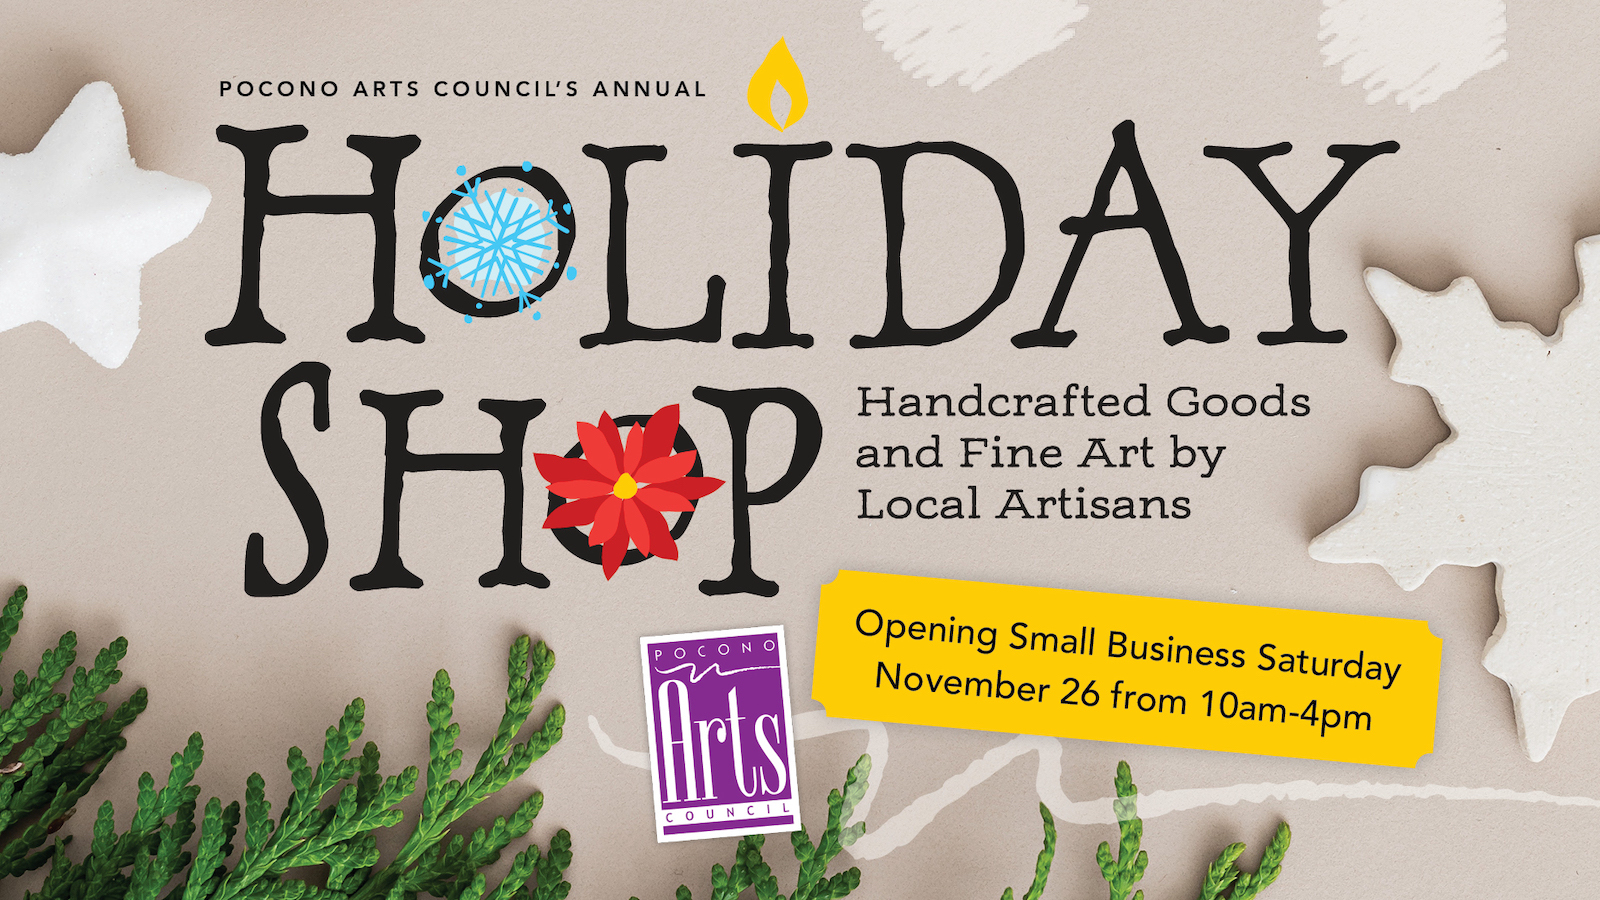 Holiday Shop: Handcrafted Goods and Fine Art by Local Artisans